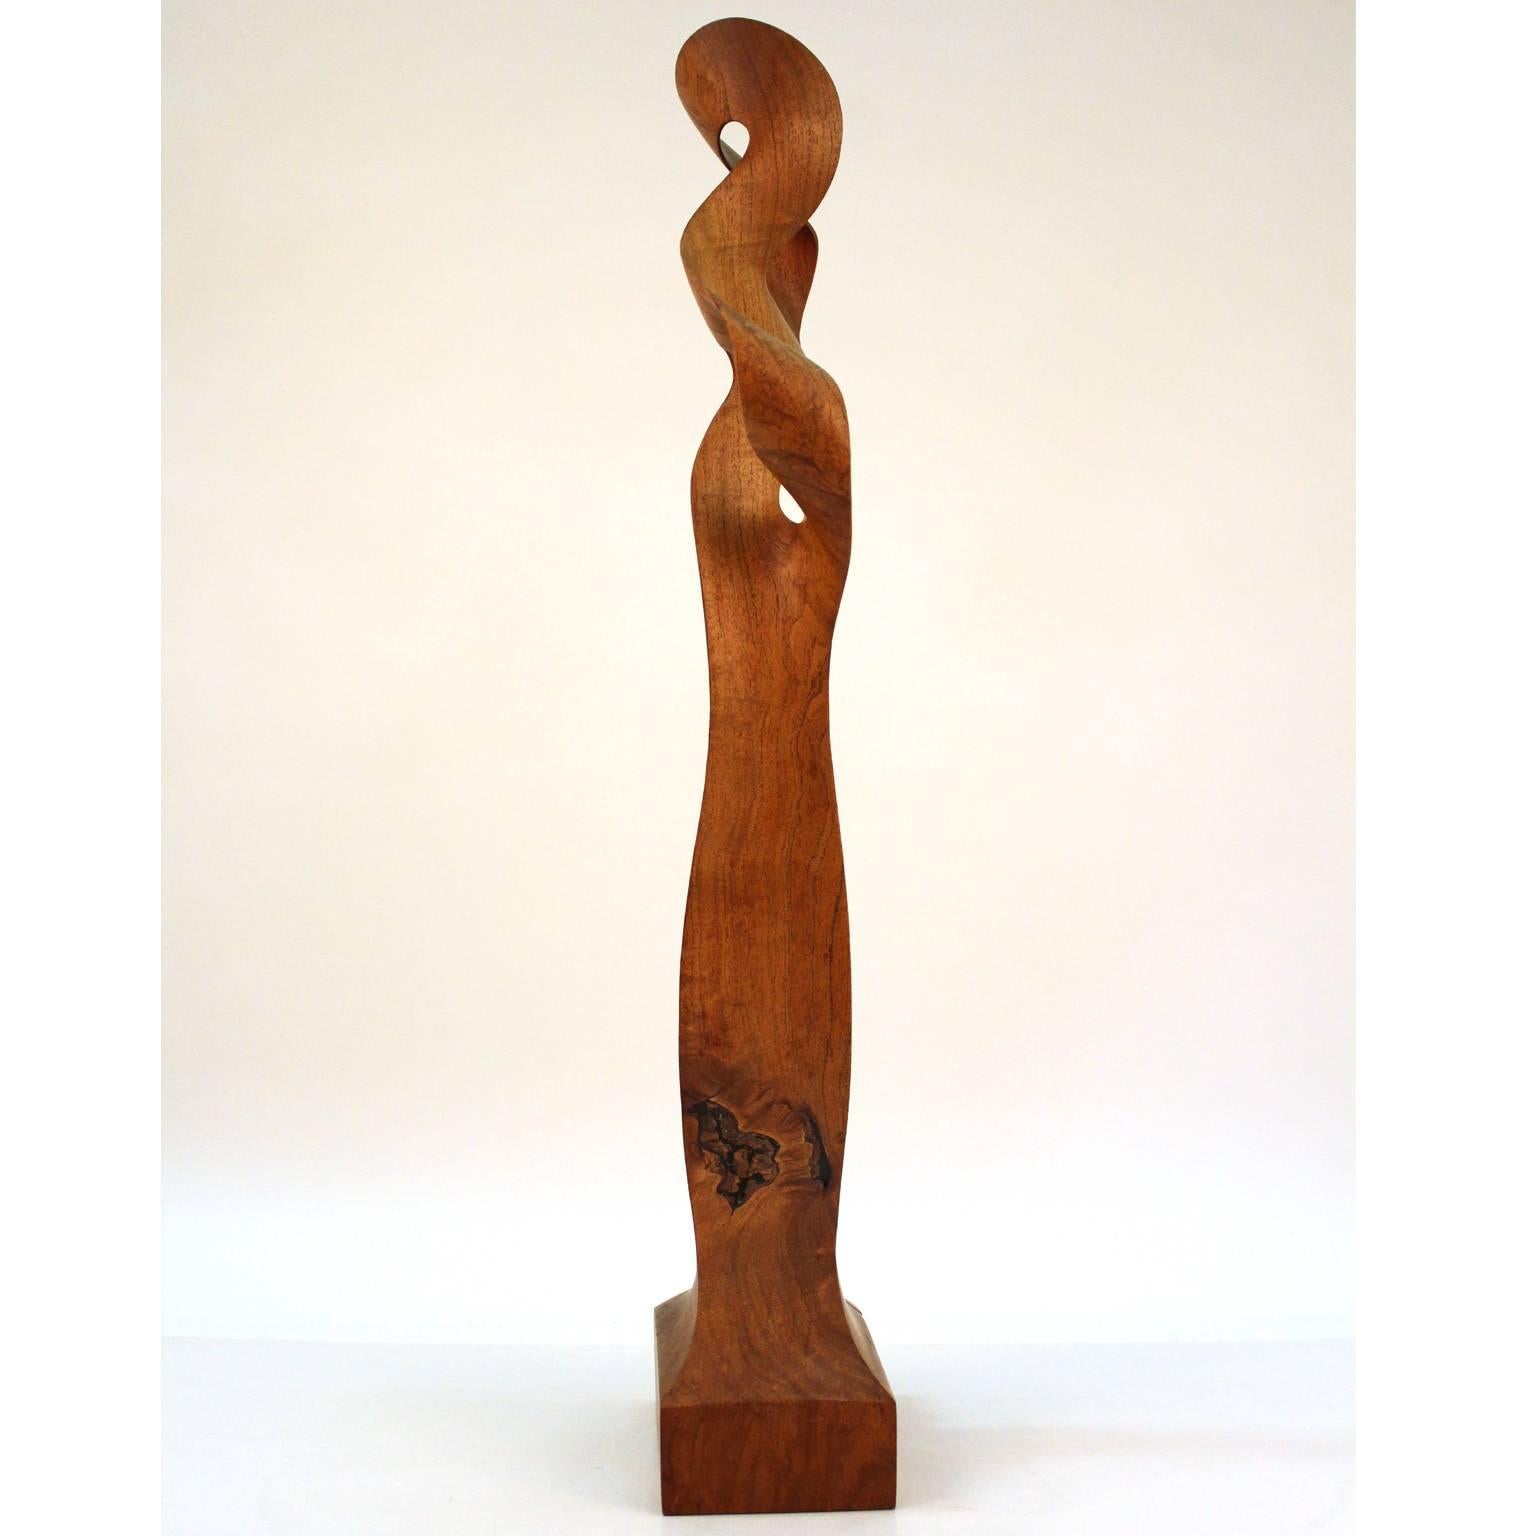 Carved Wood Thomas Woodward Sculpture In Excellent Condition For Sale In New York, NY